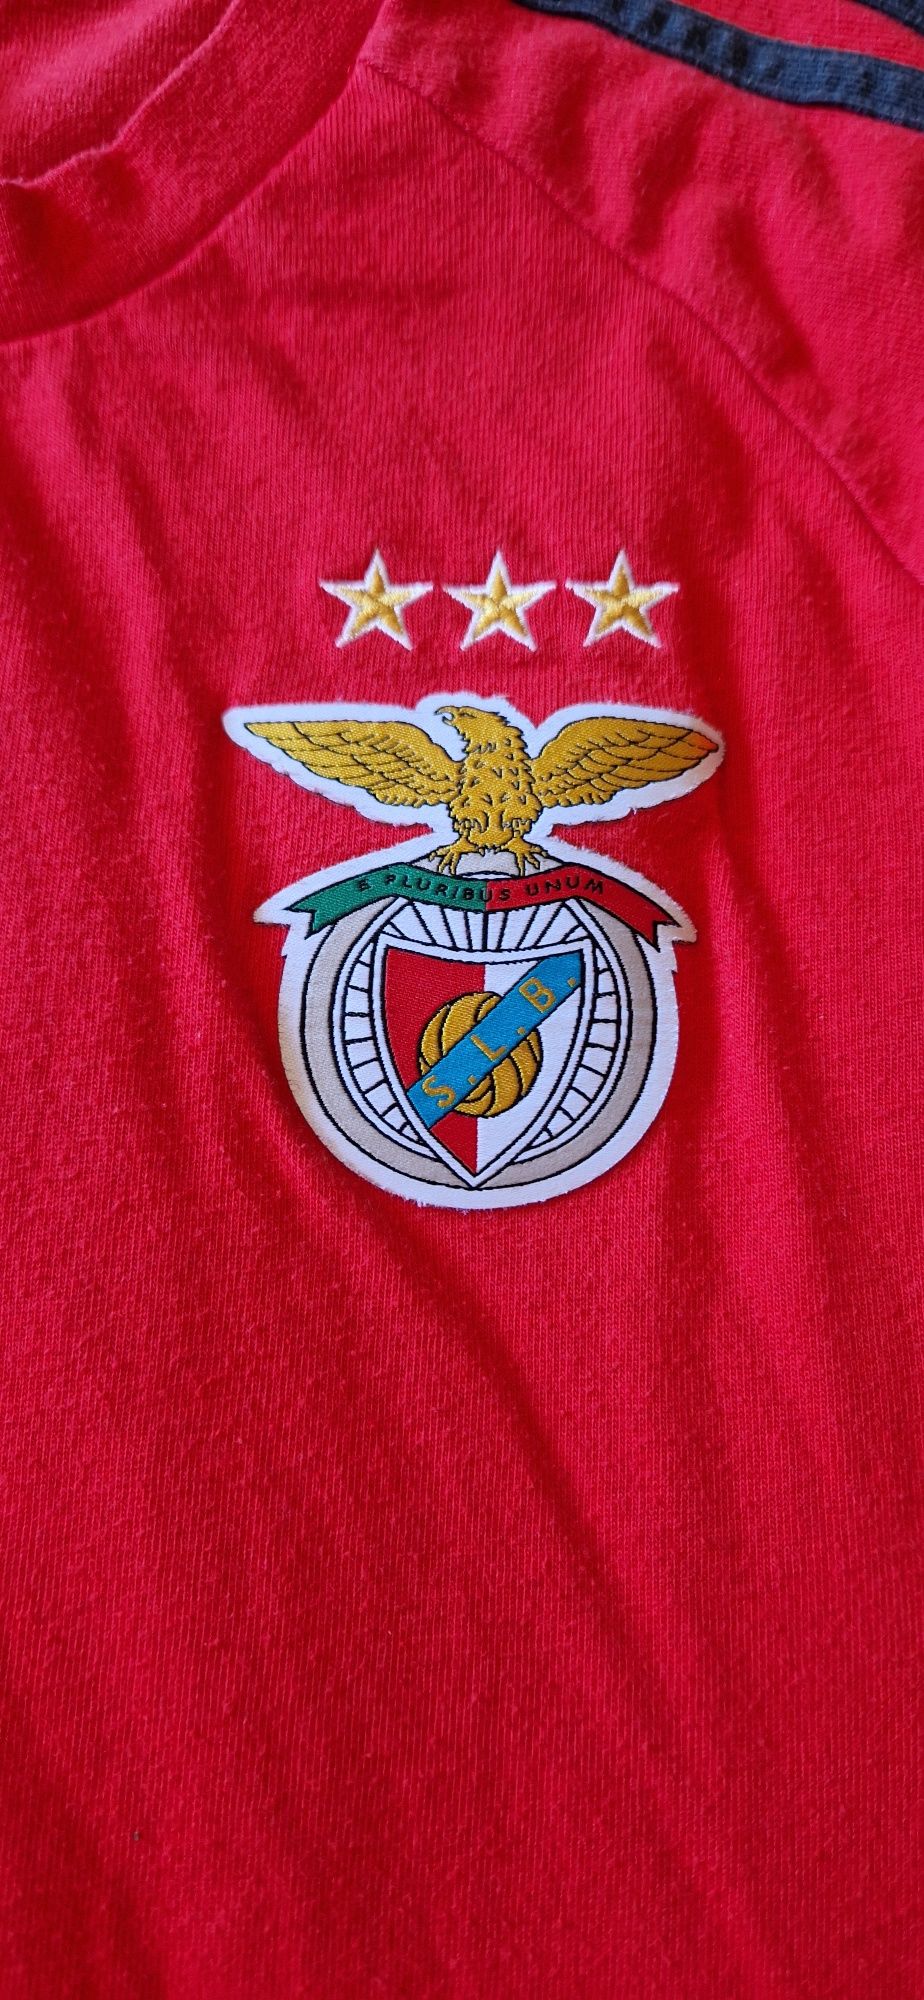 Camisola staff SLB Benfica